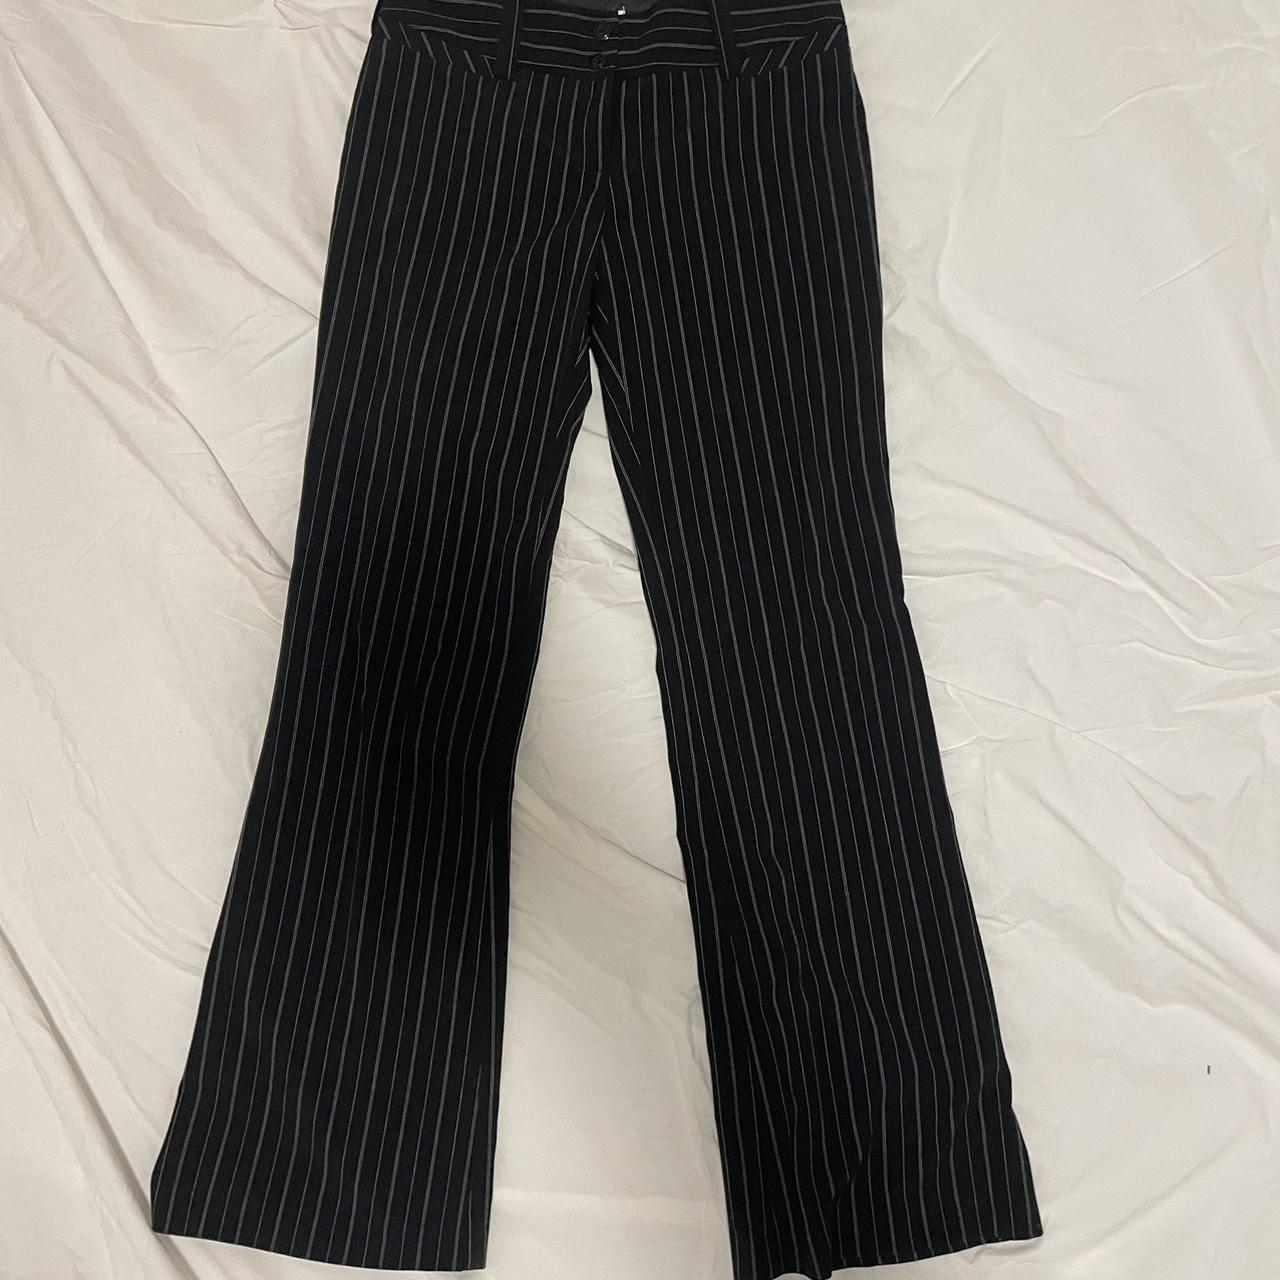 Low rise pin-striped flare pants - Depop